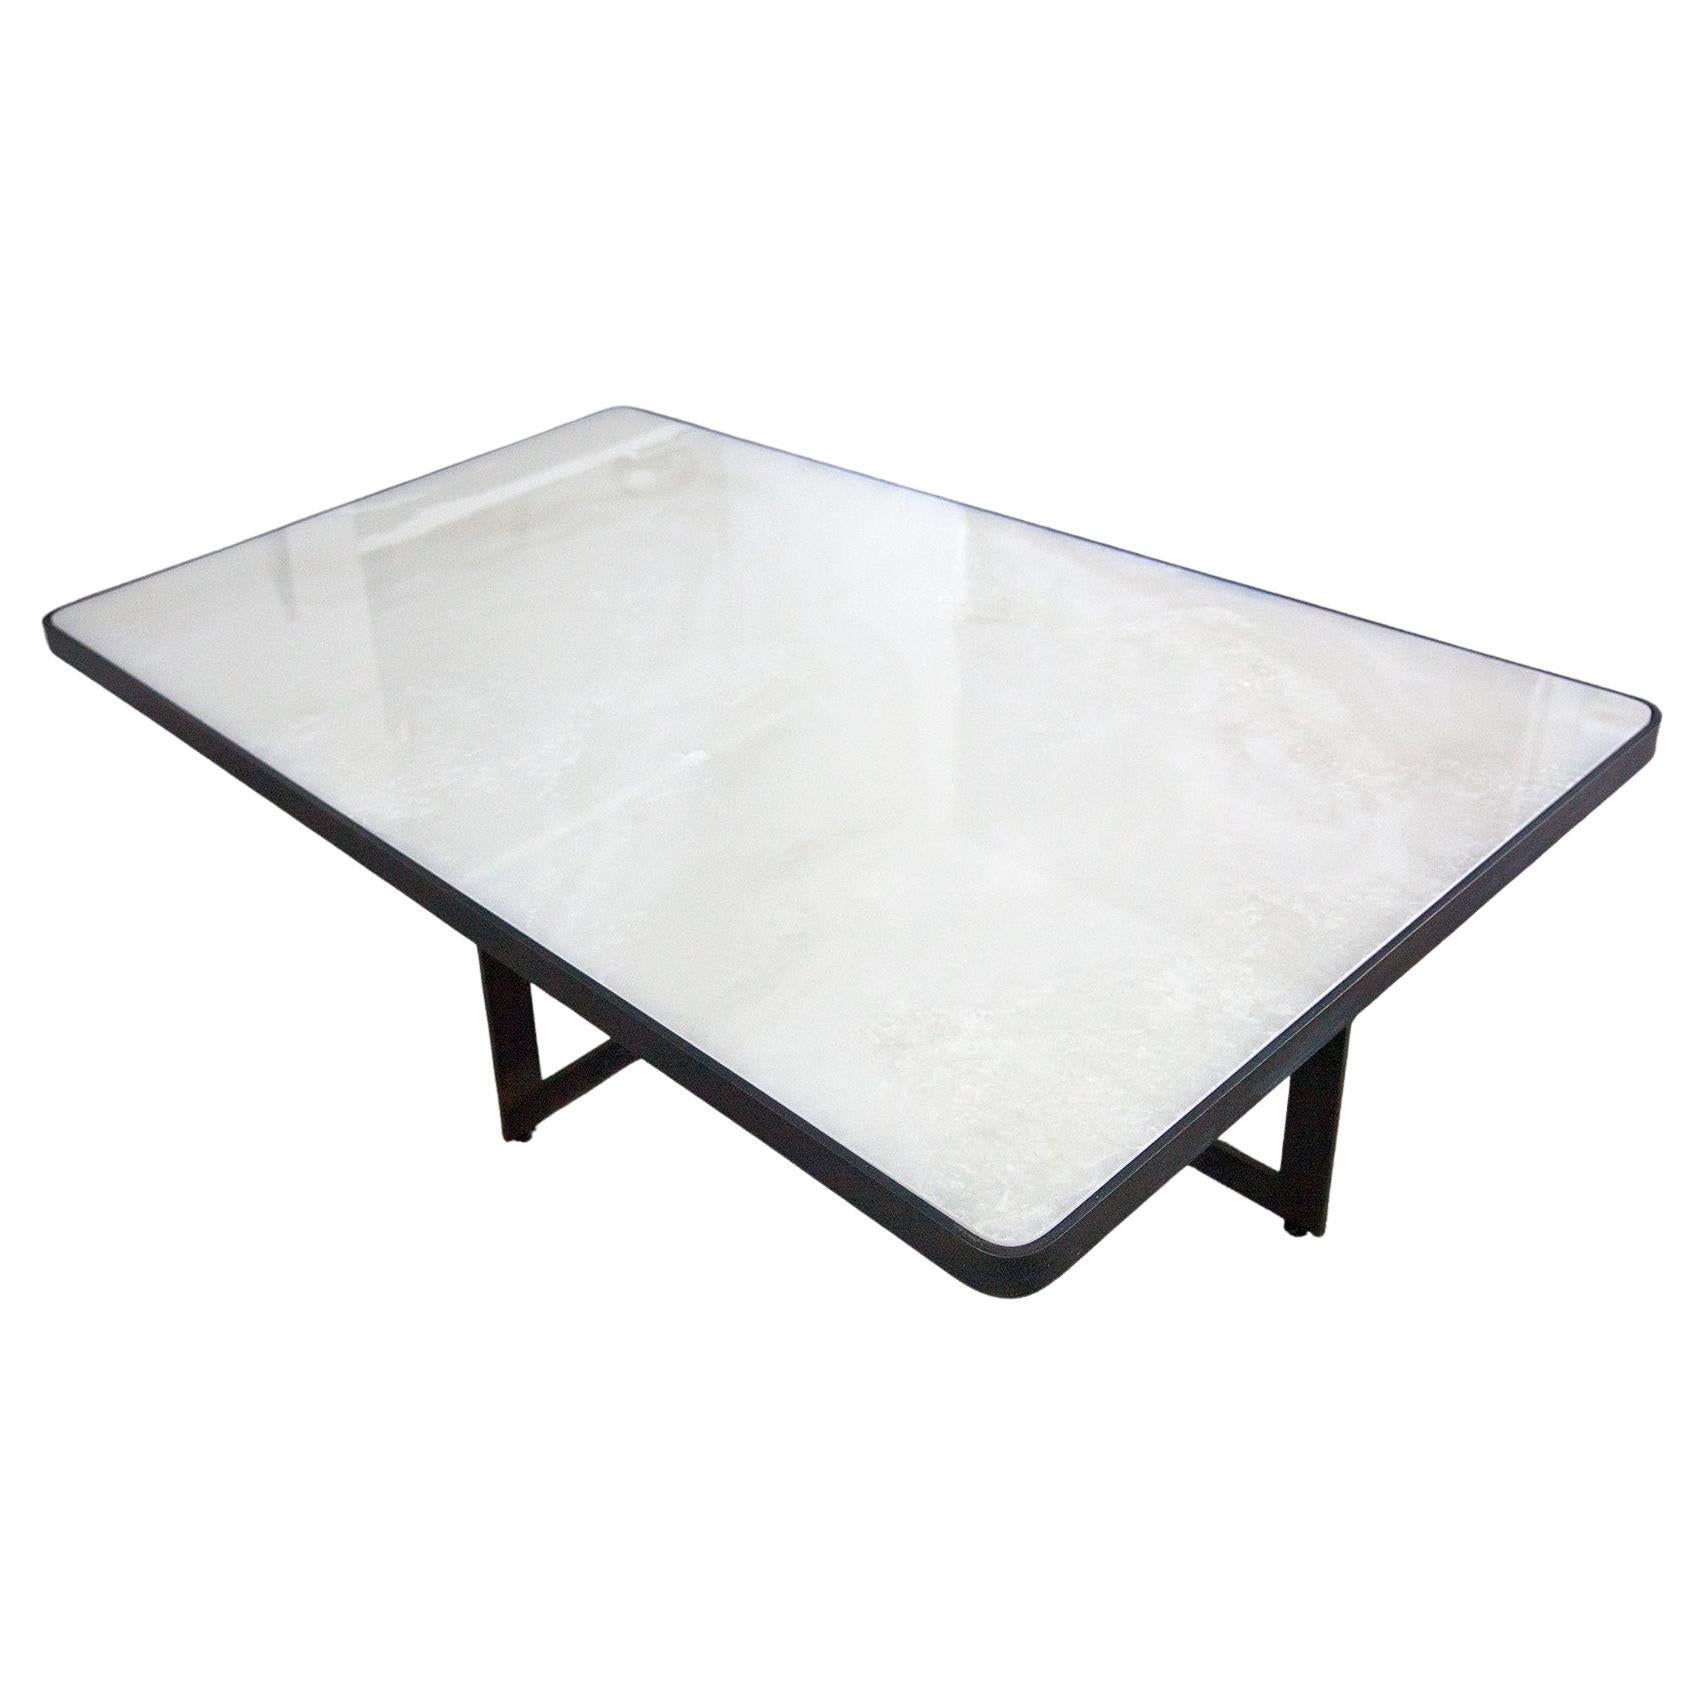 This stunning modern white quartzite coffee table with blackened steel base reflects a striking juxtaposition of materials and form. The luminous white quartzite is encased in molded blackened steel with a sleek steel cross base. While the steel